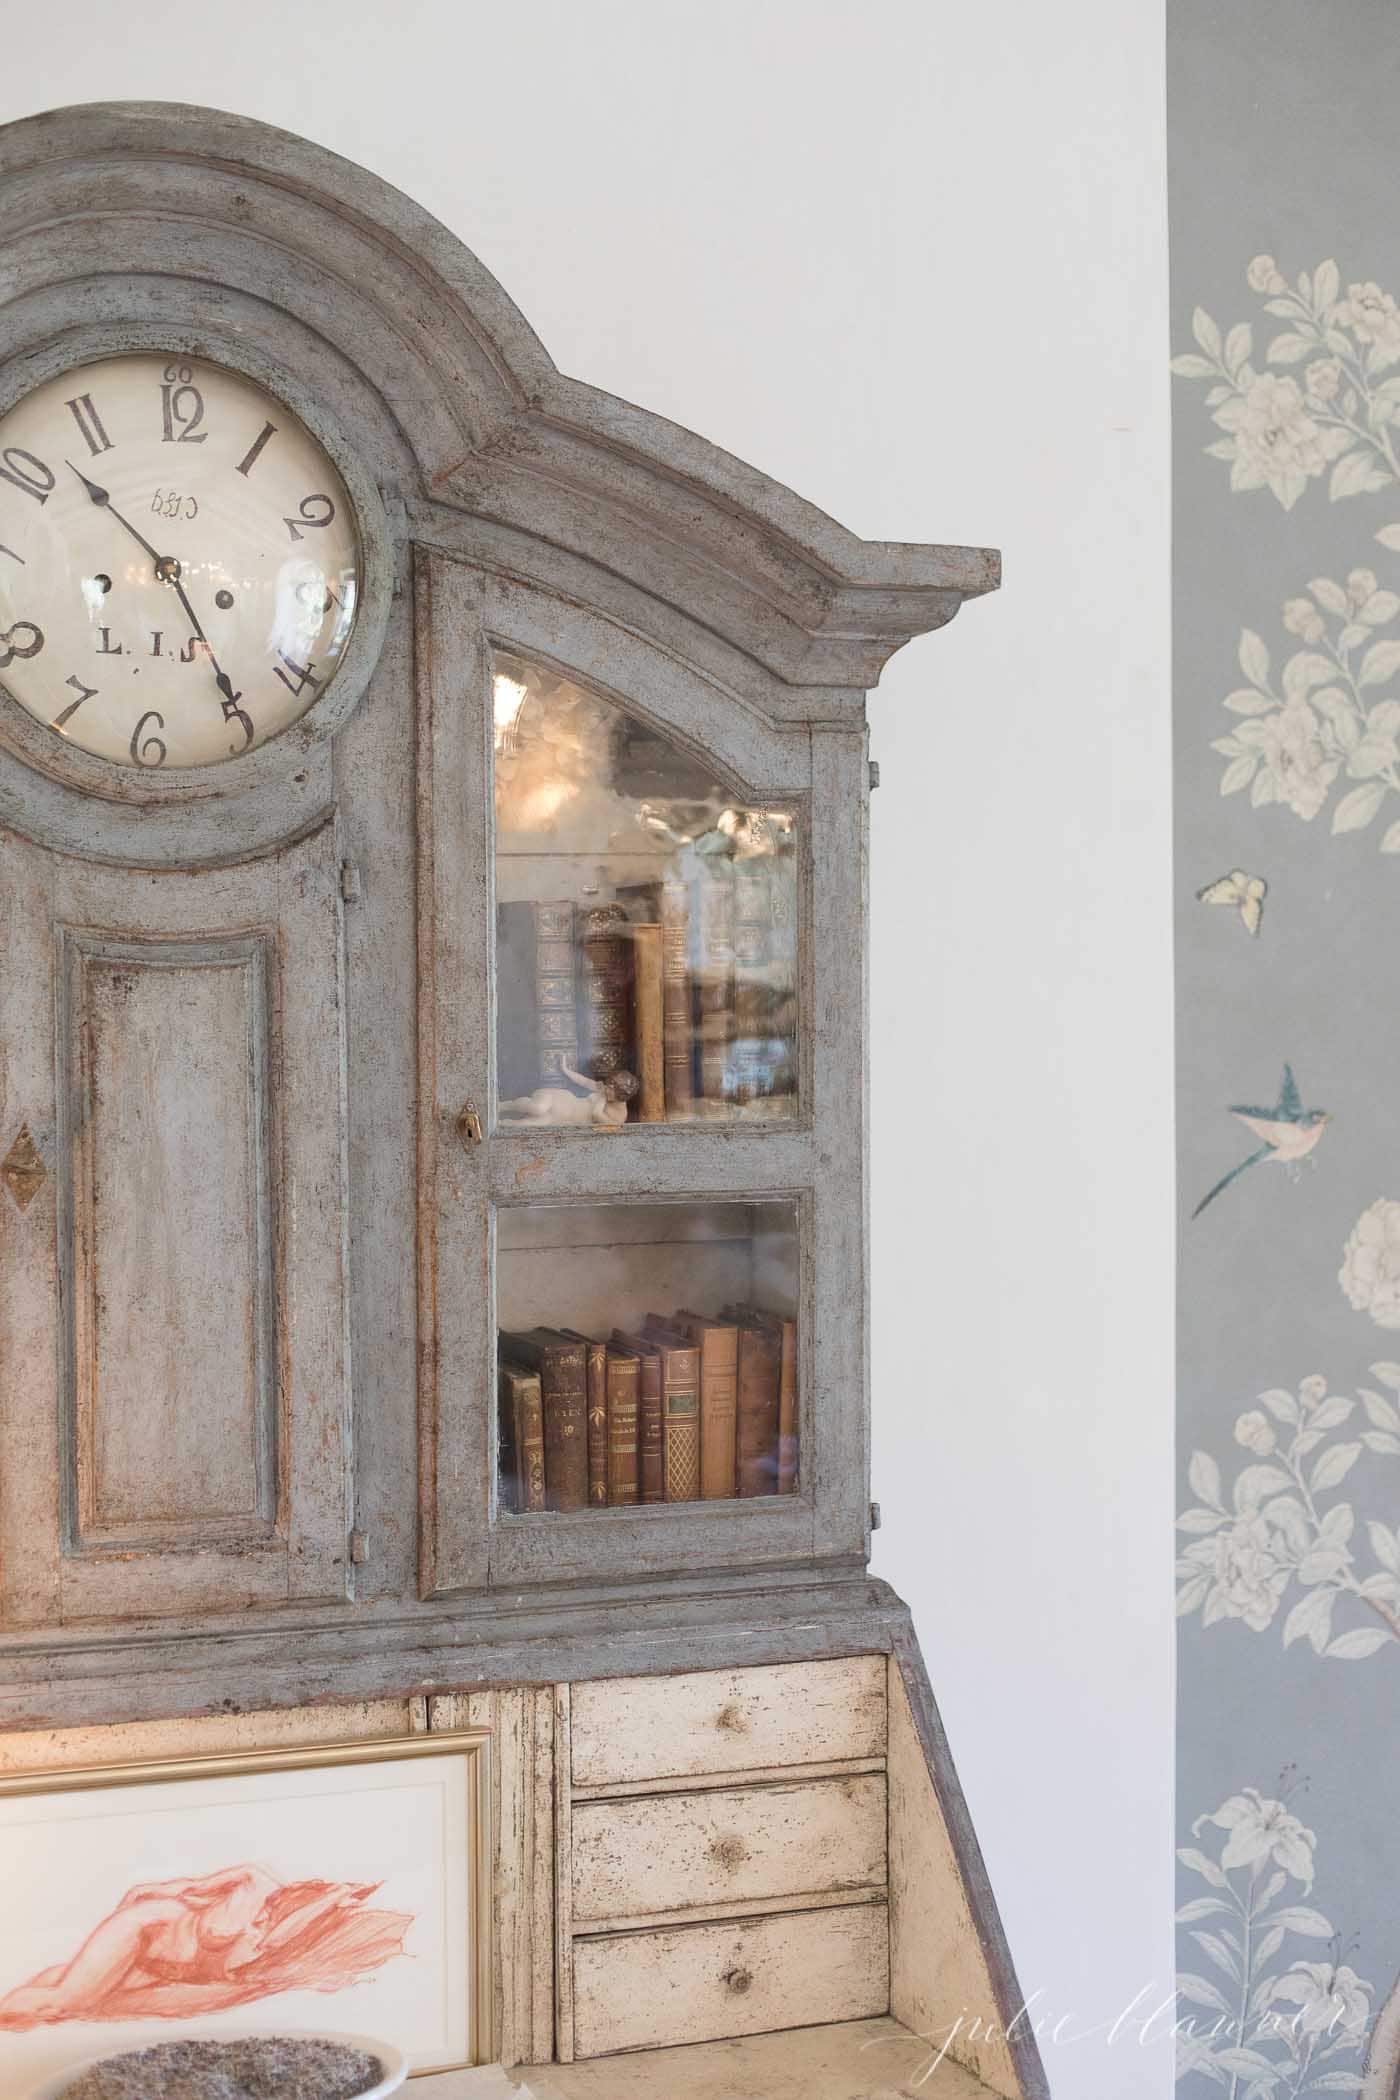 An old painted grandfather clock with a gray finish.